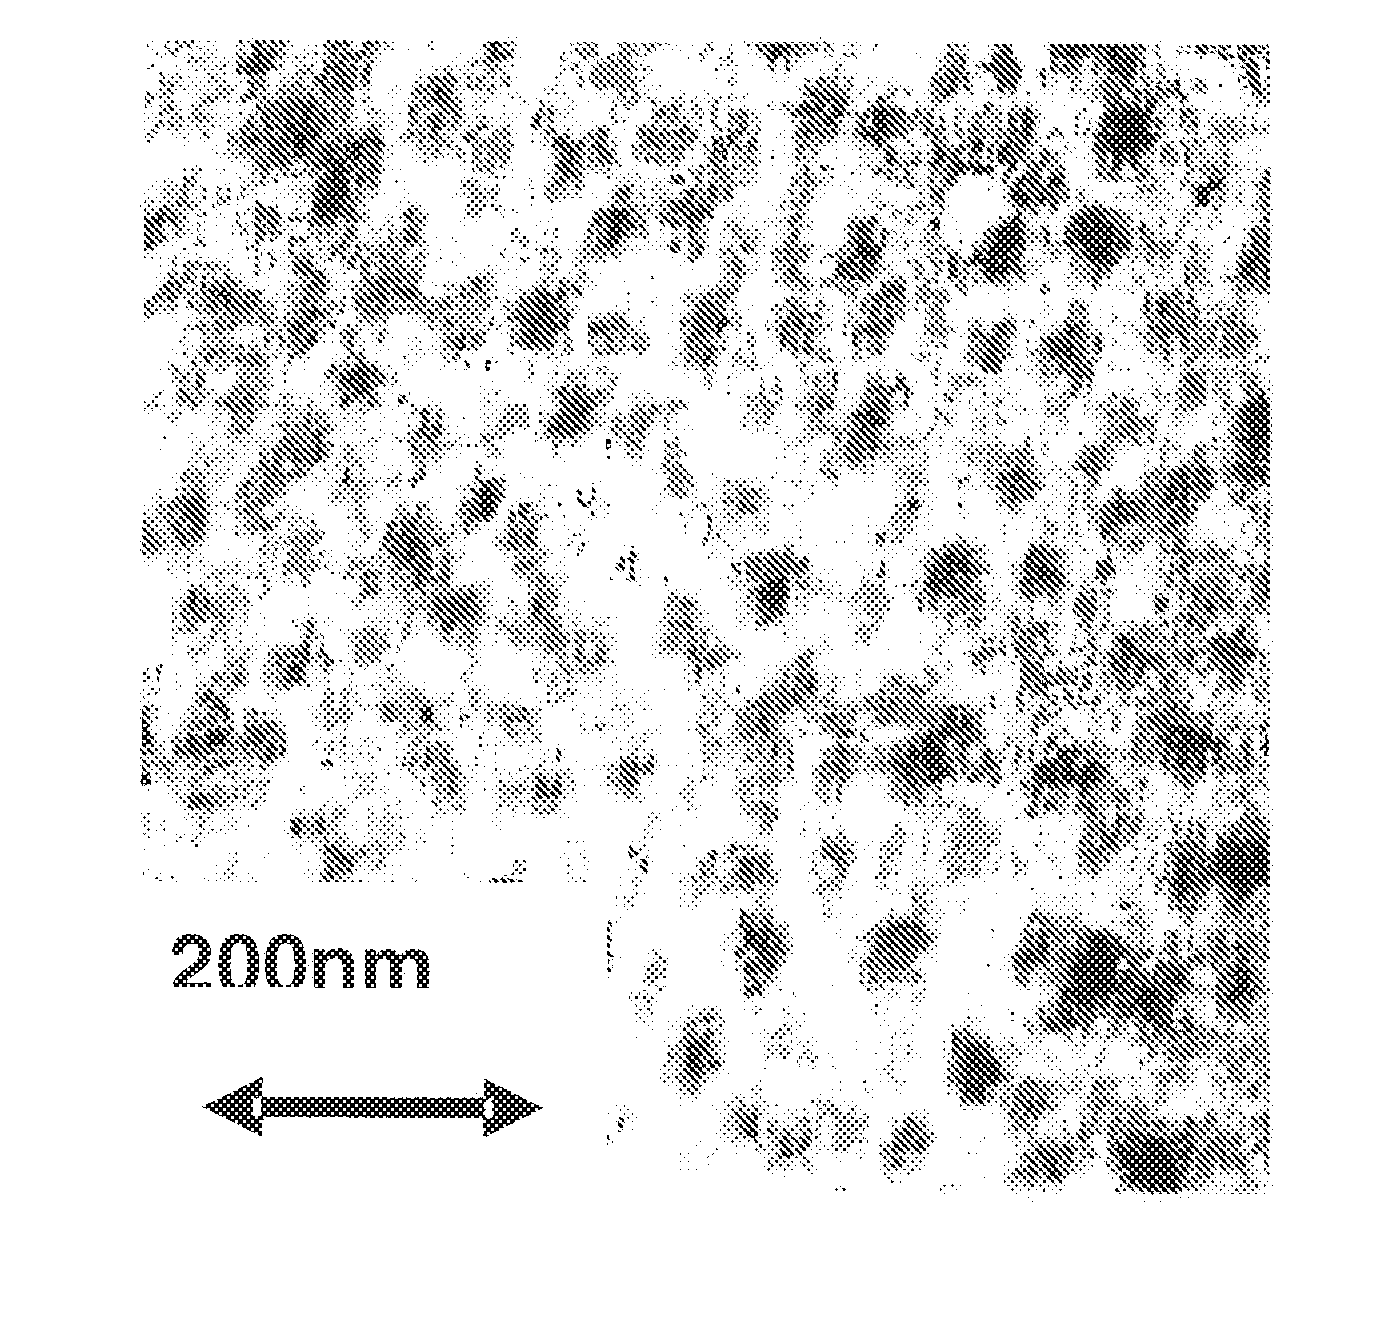 Process for production of cross copolymers, cross copolymers obtained by the process, and use thereof